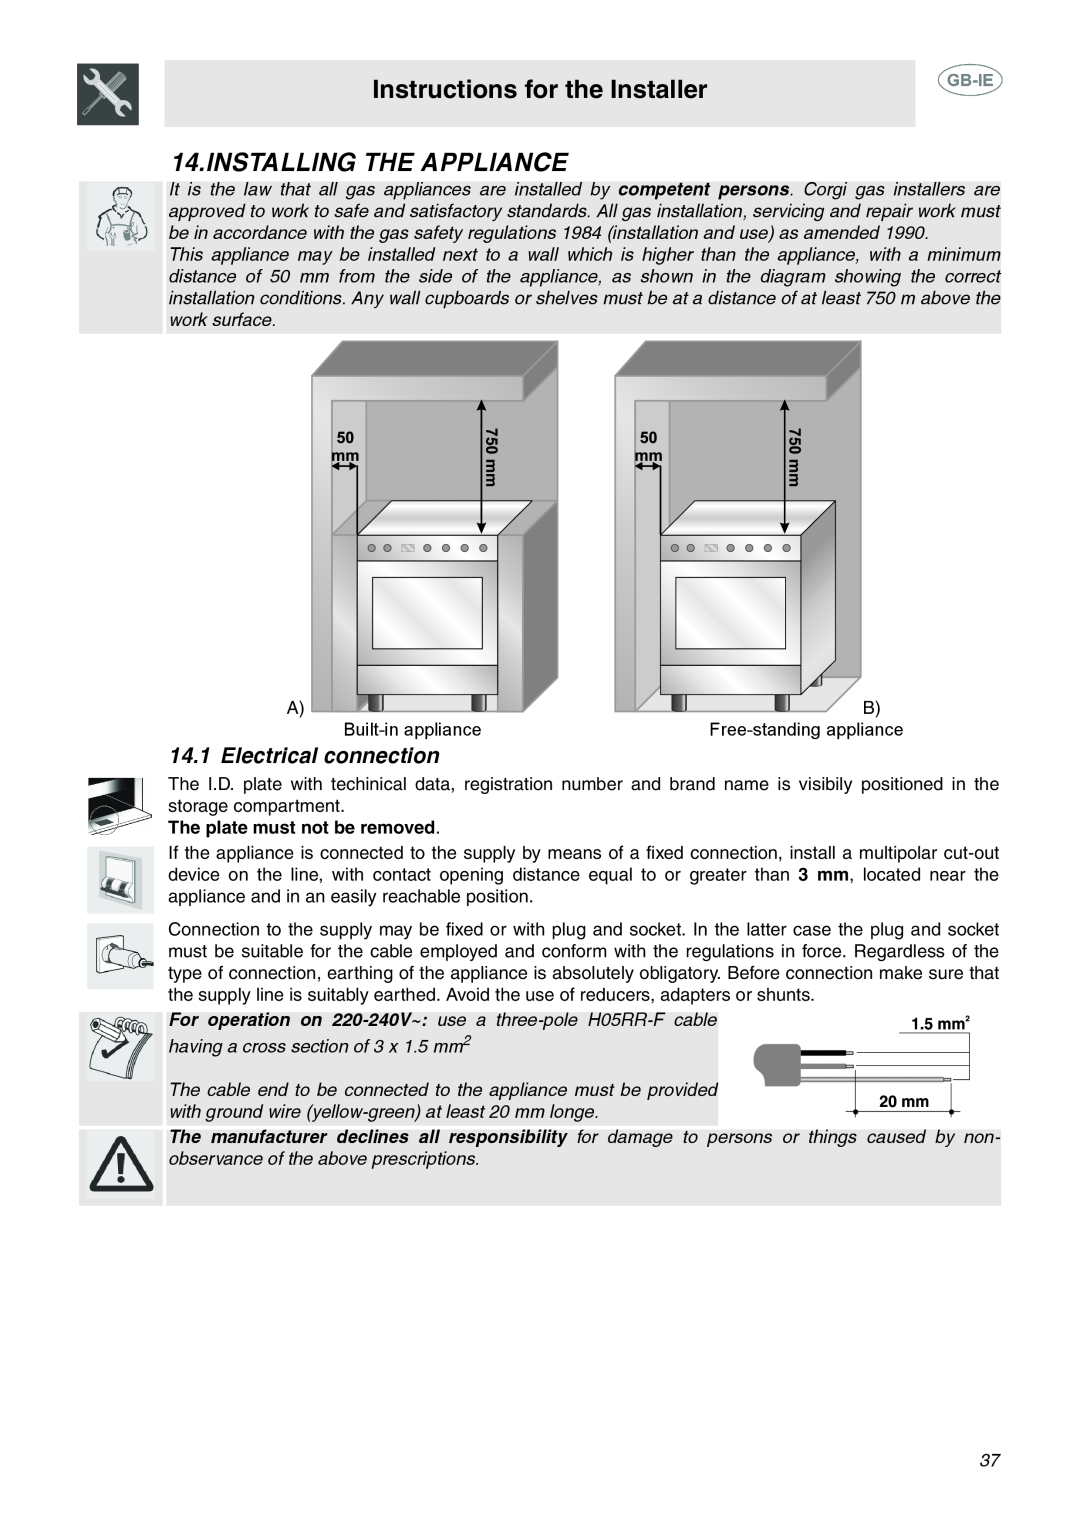 Smeg C6GMX manual Instructions for the Installer, Installing The Appliance, Electrical connection 